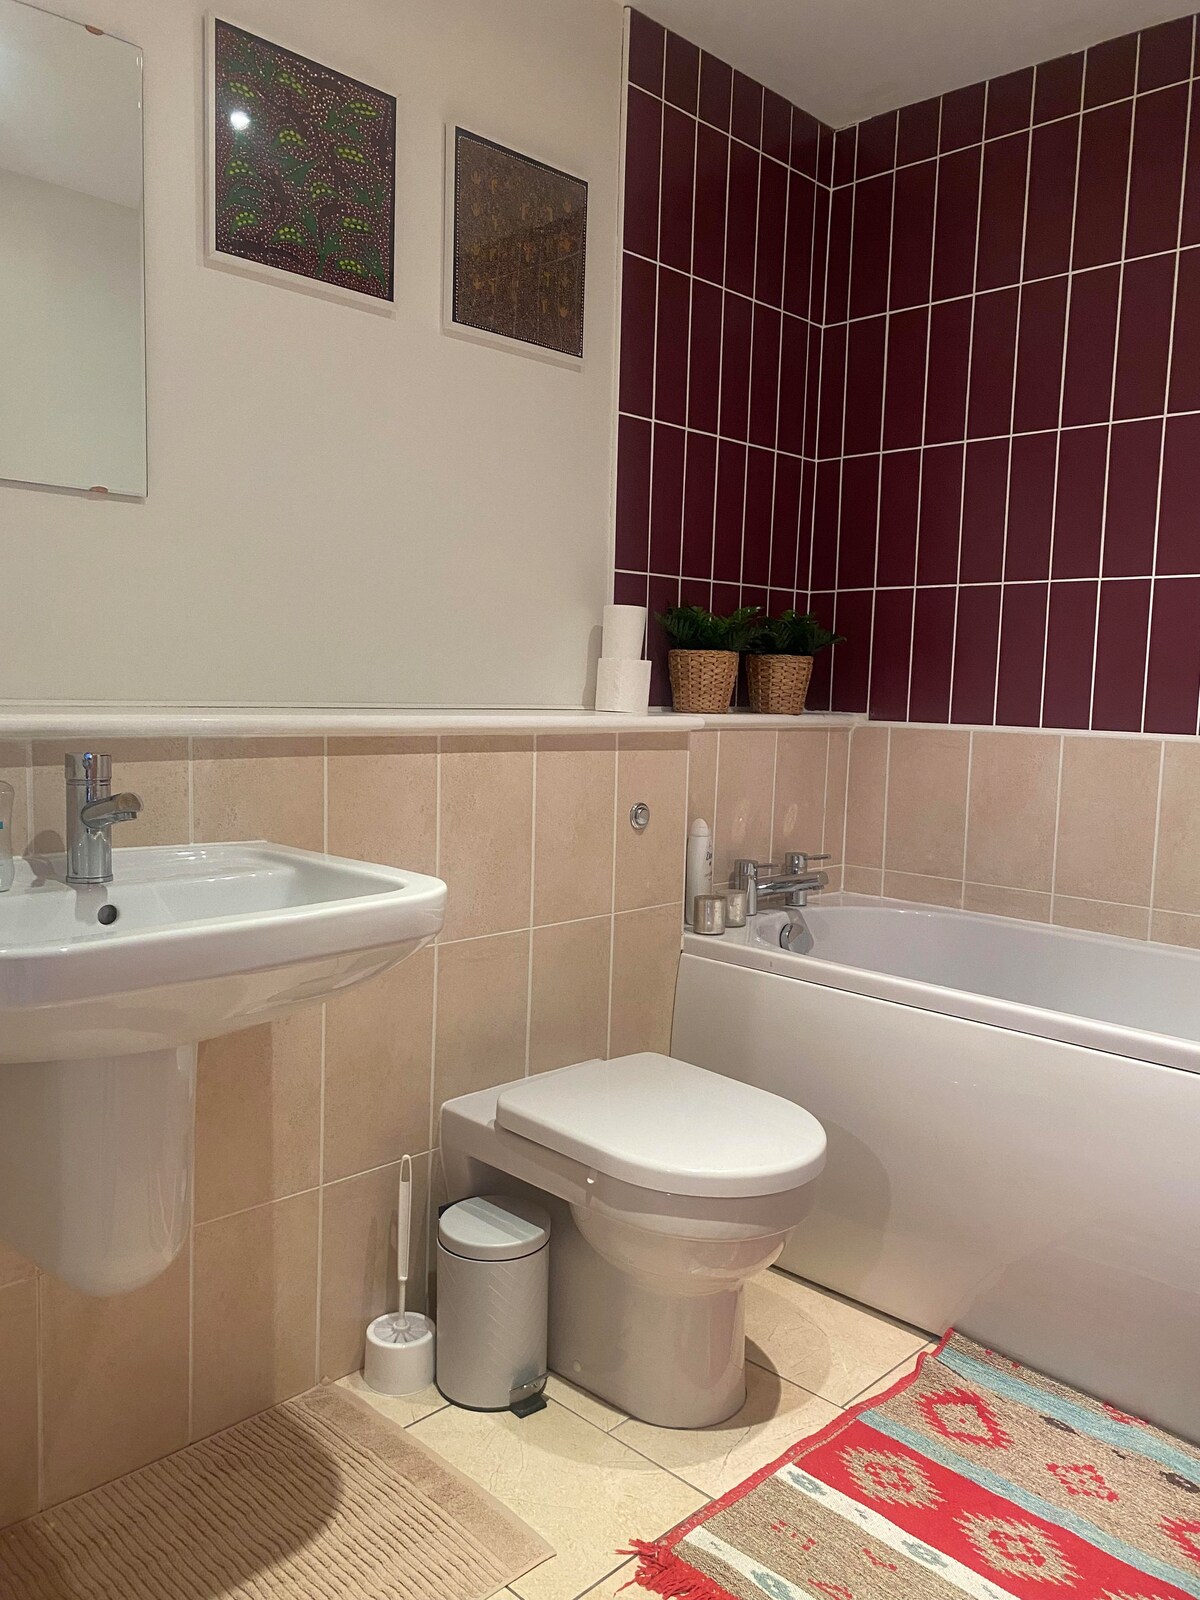 A friendly home in Glasgow with private bathroom